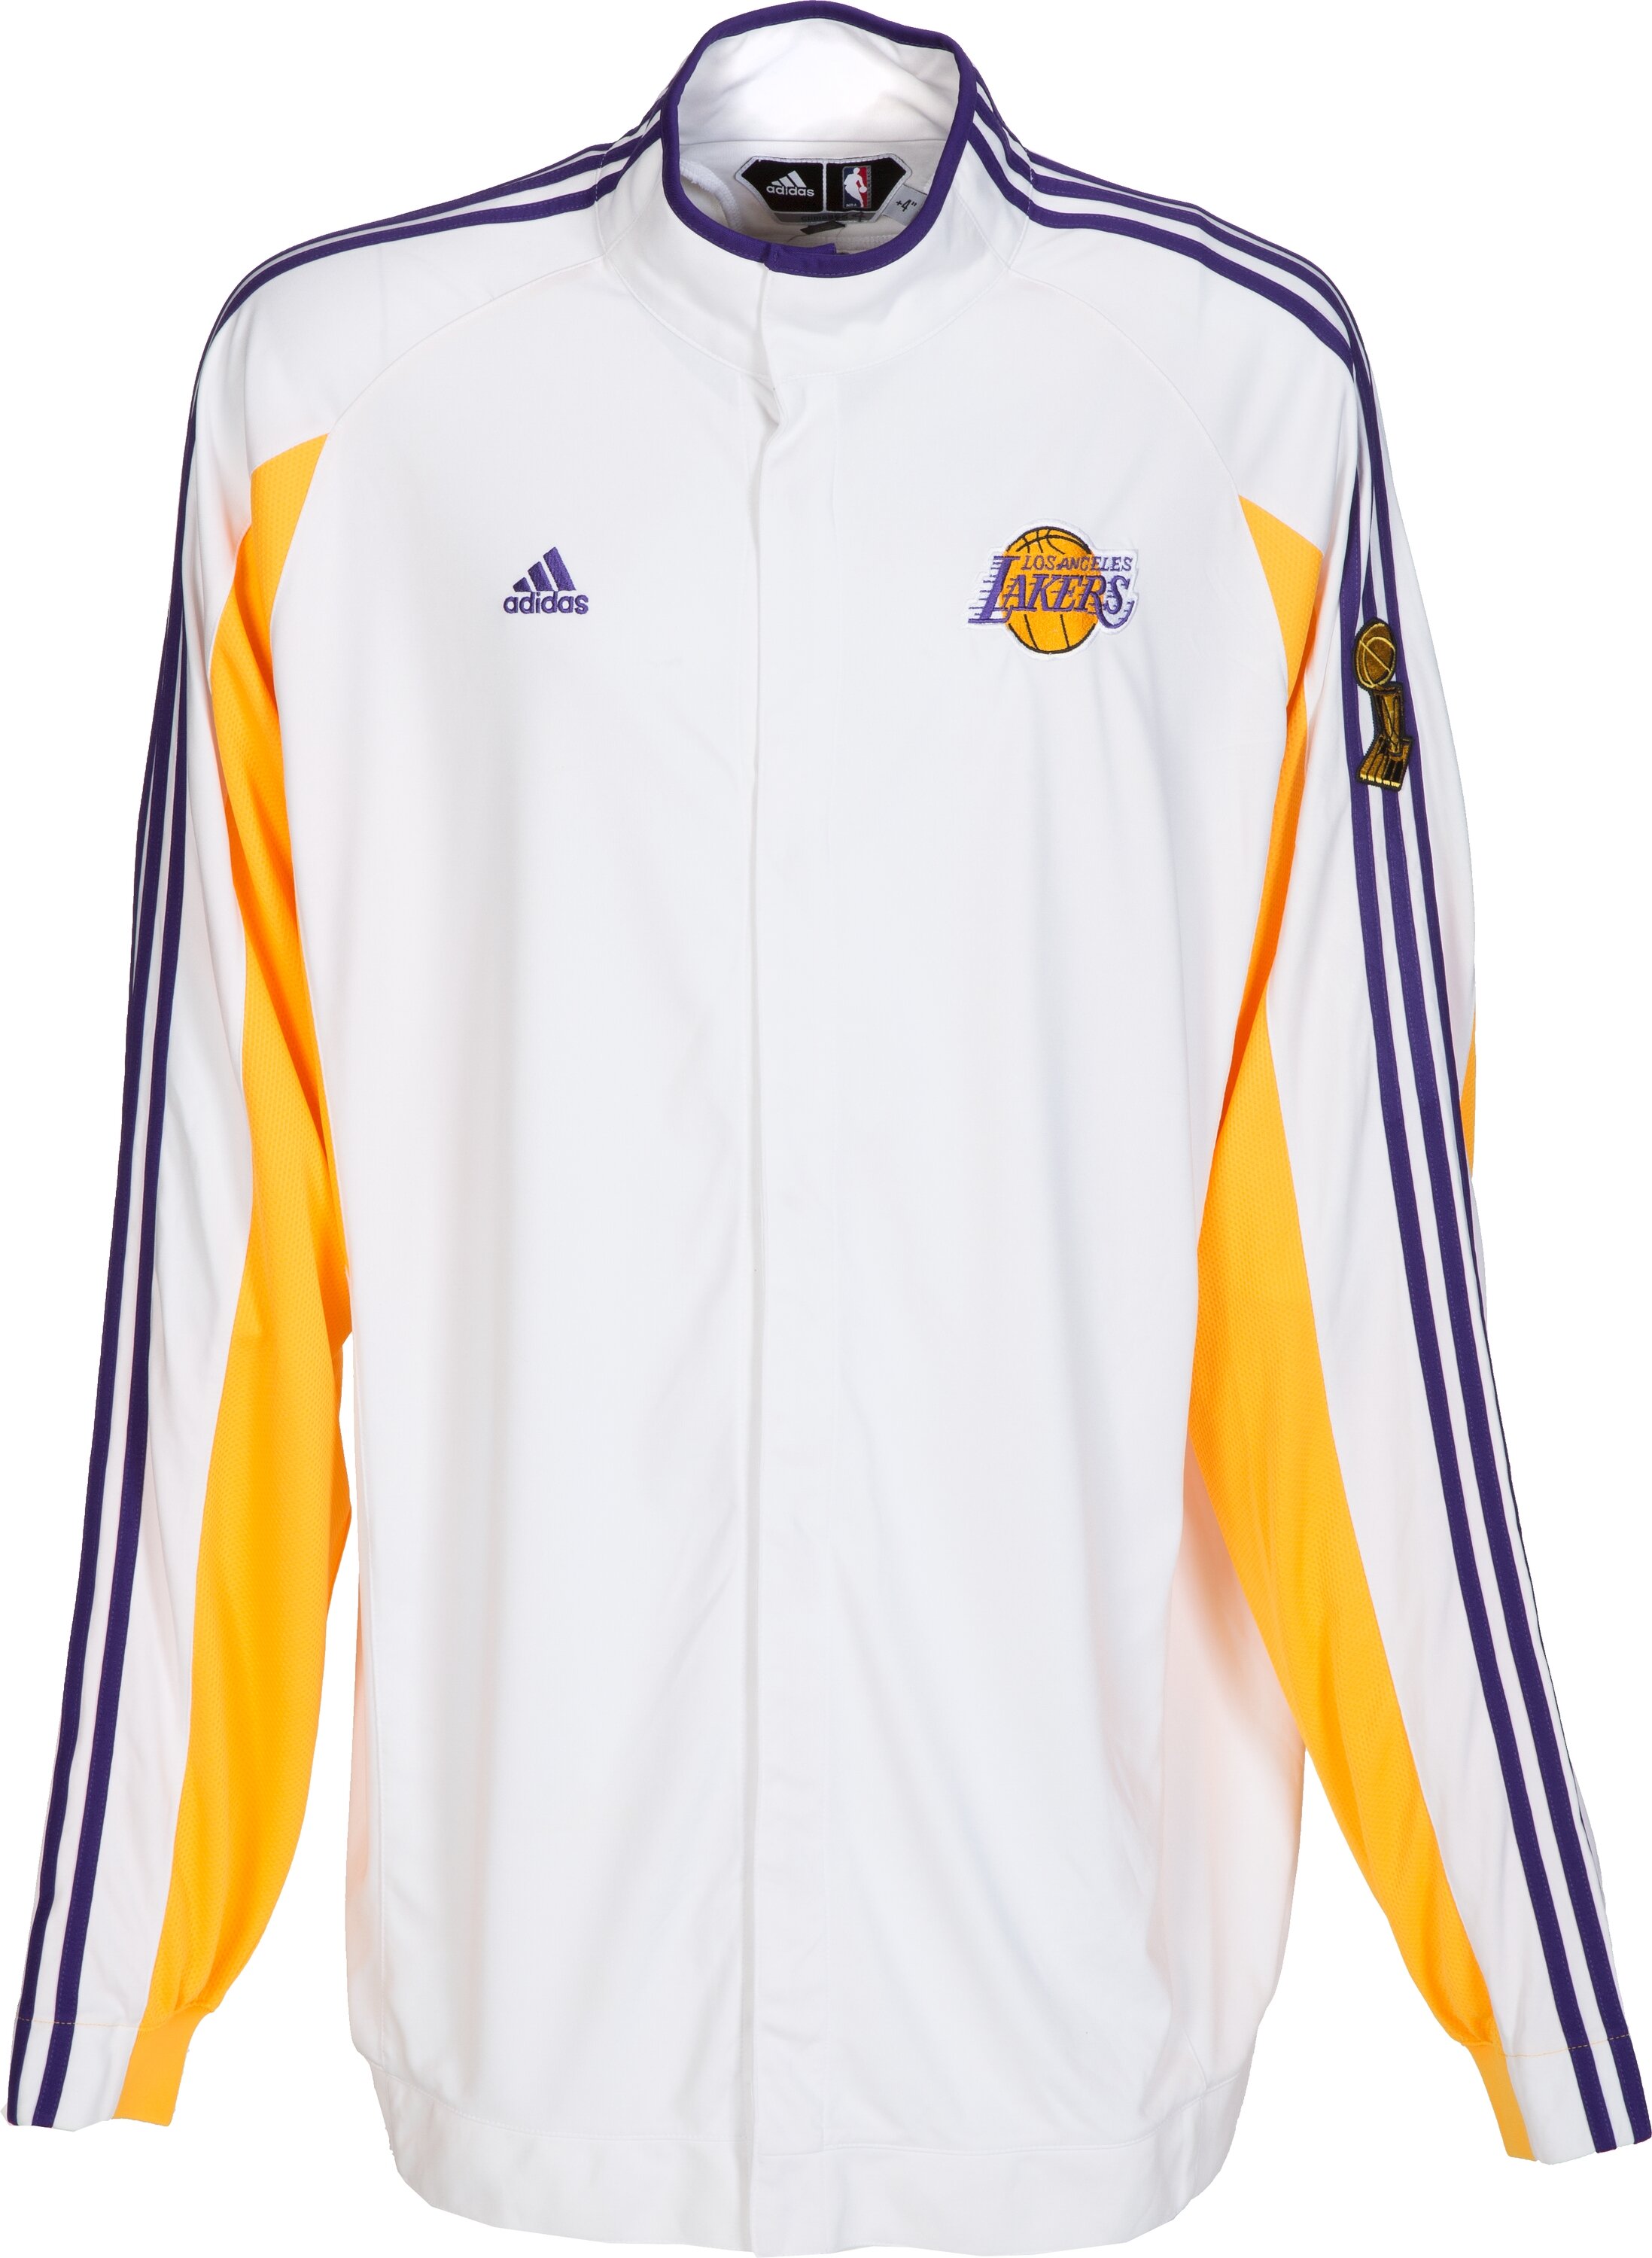 1/6 NBA Lakers Warm Up Suit